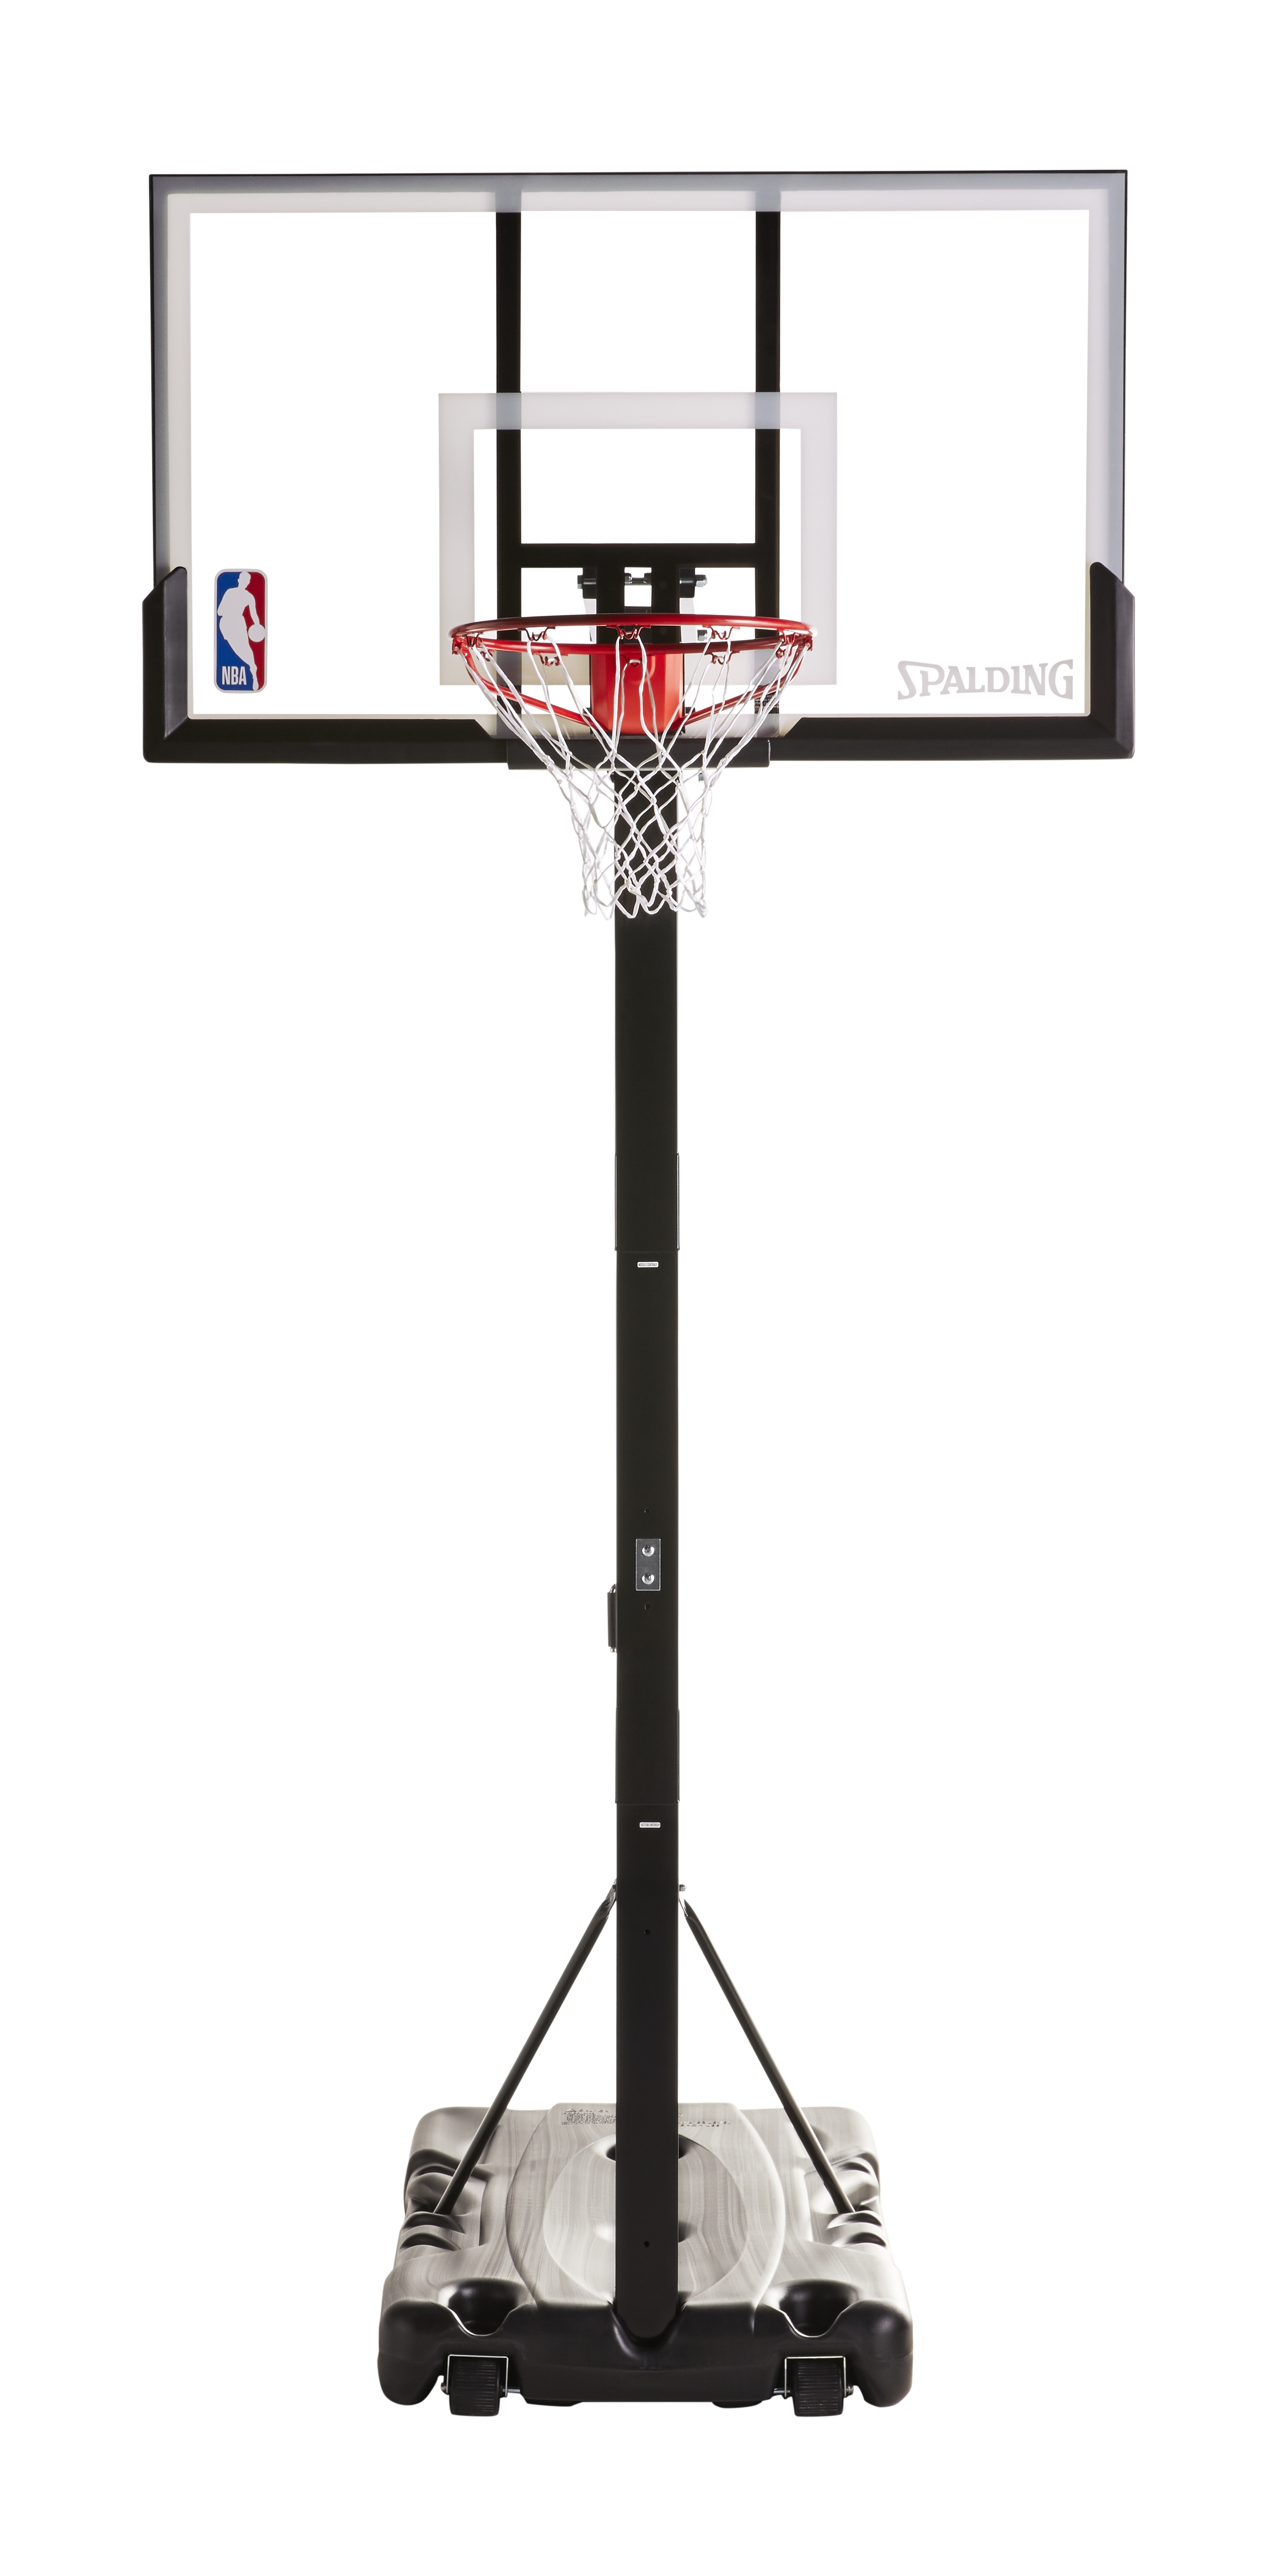 Spalding NBA 54 In. Portable Basketball System Screw Jack Hoop with Polycarbonate Backboard - image 3 of 9